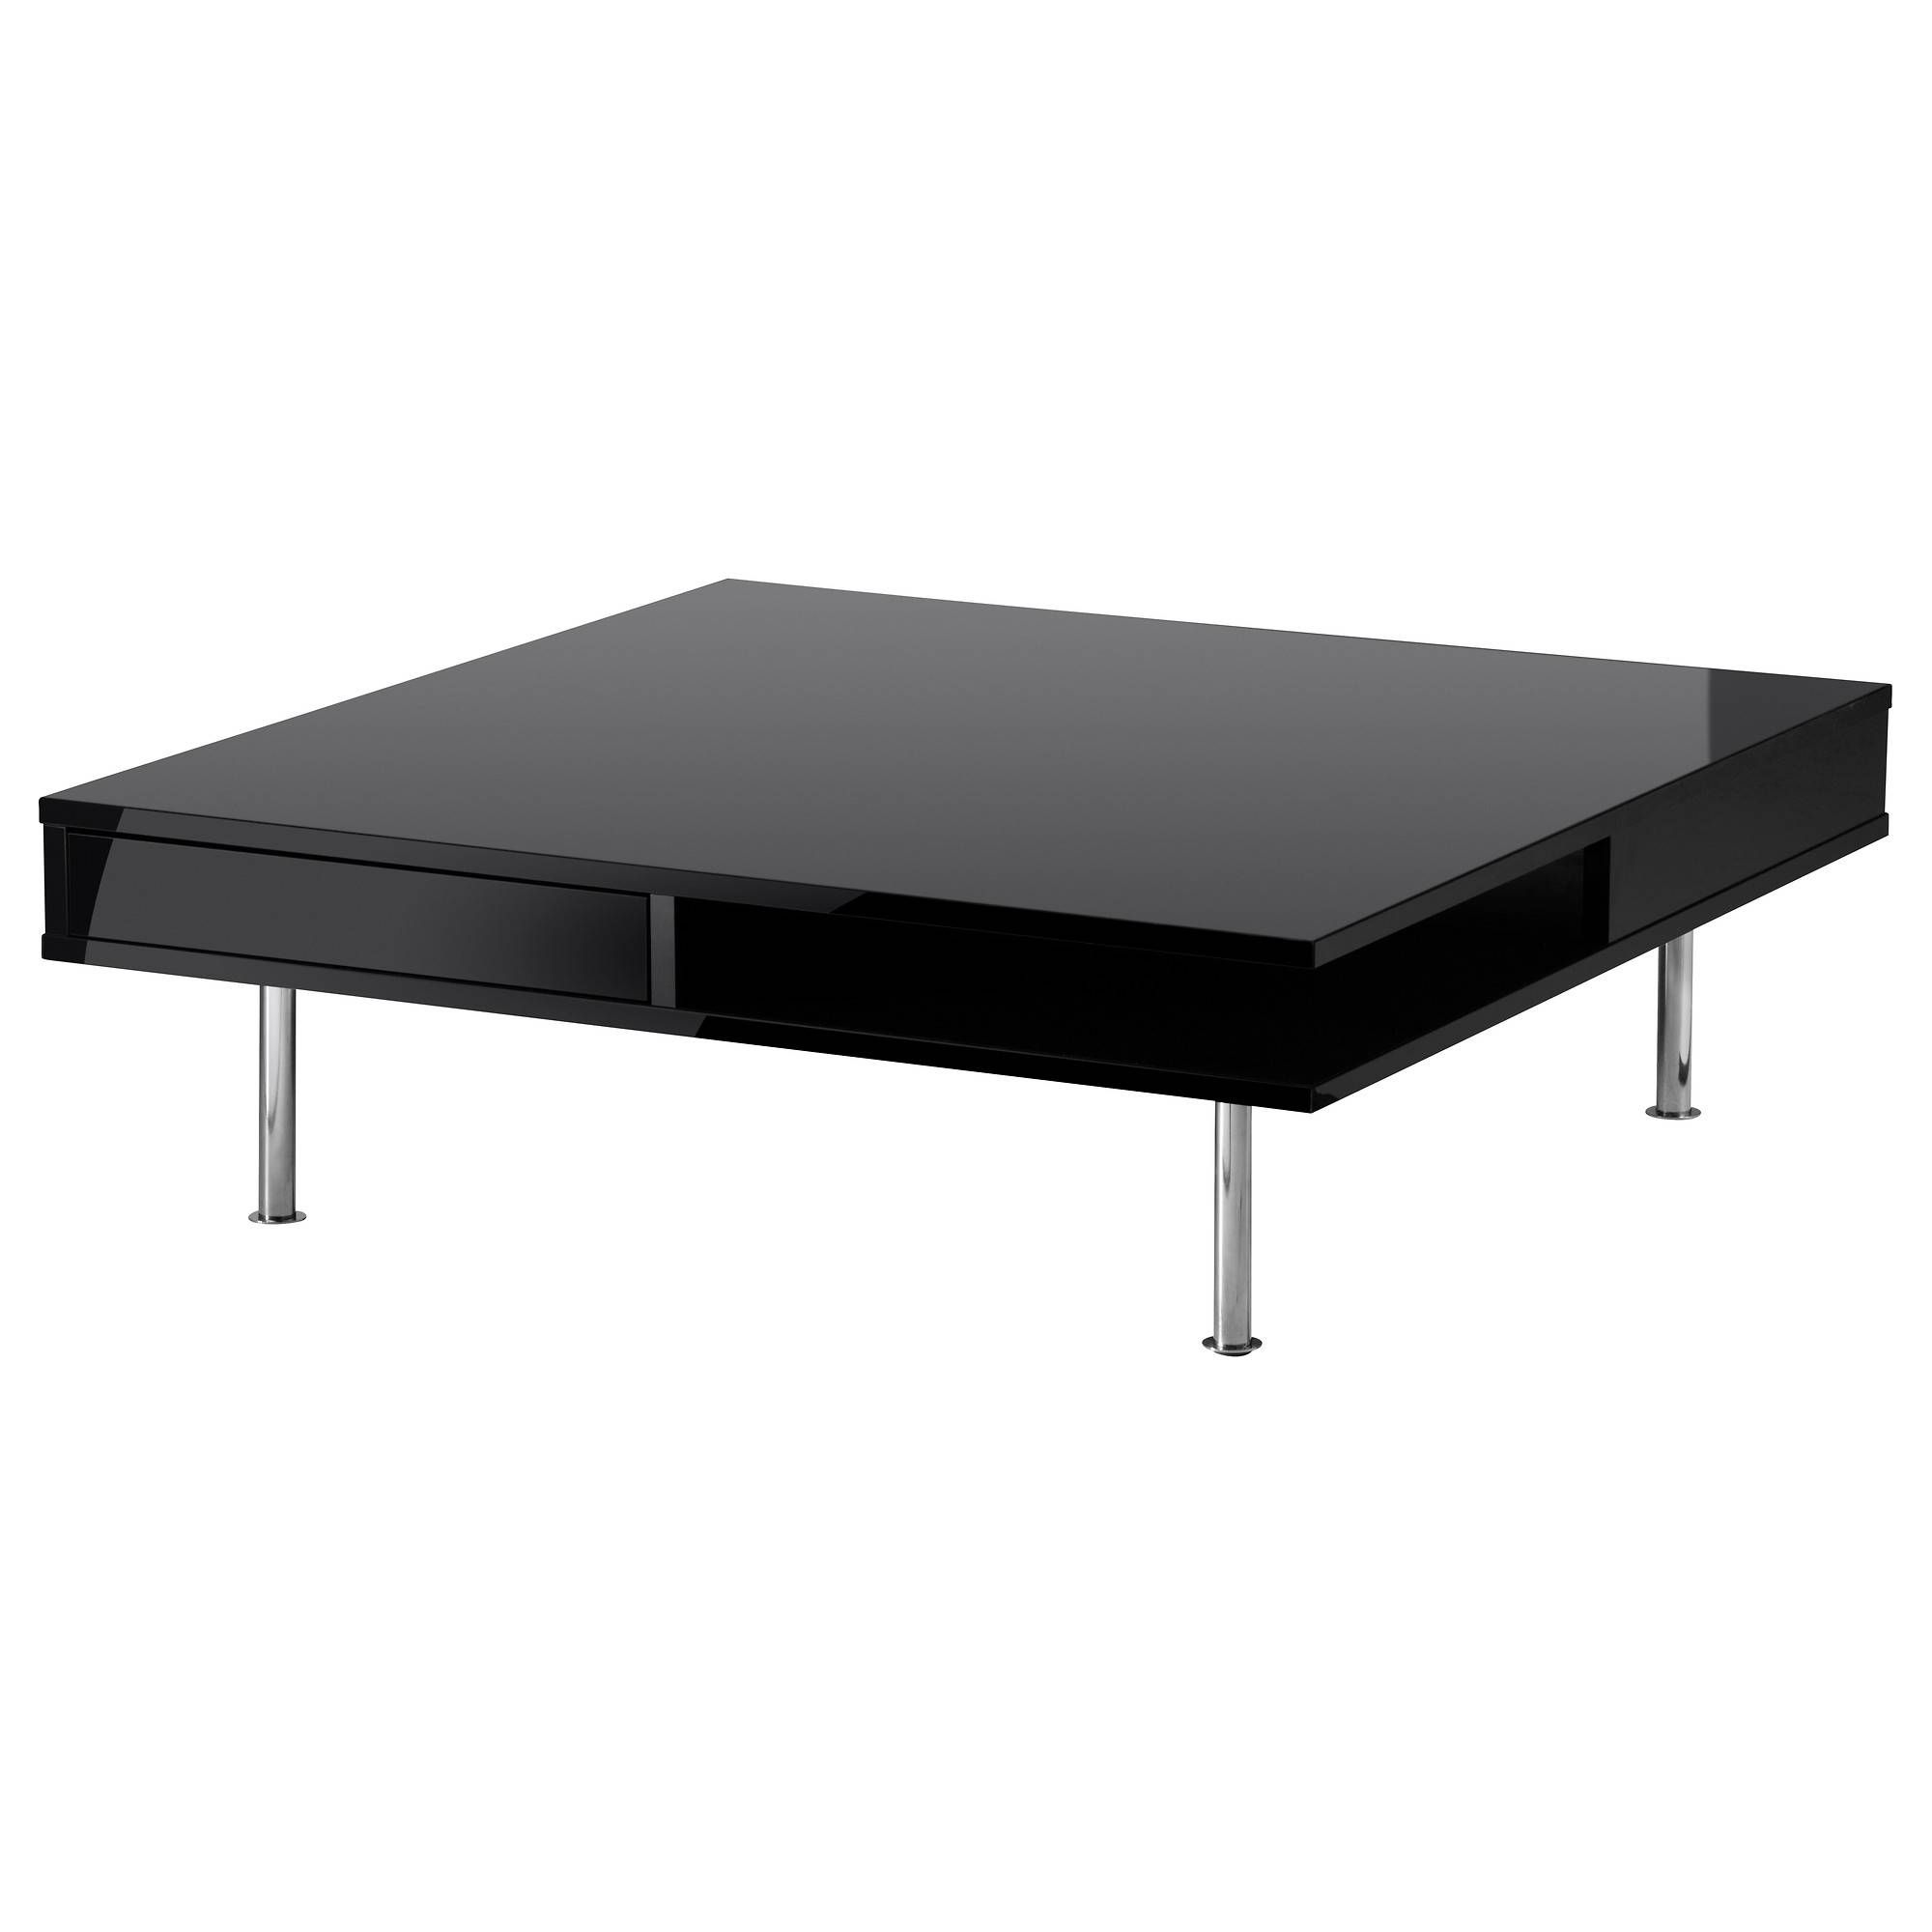 Tofteryd Coffee Table – High Gloss White – Ikea In Coffee Tables White High Gloss (View 28 of 30)